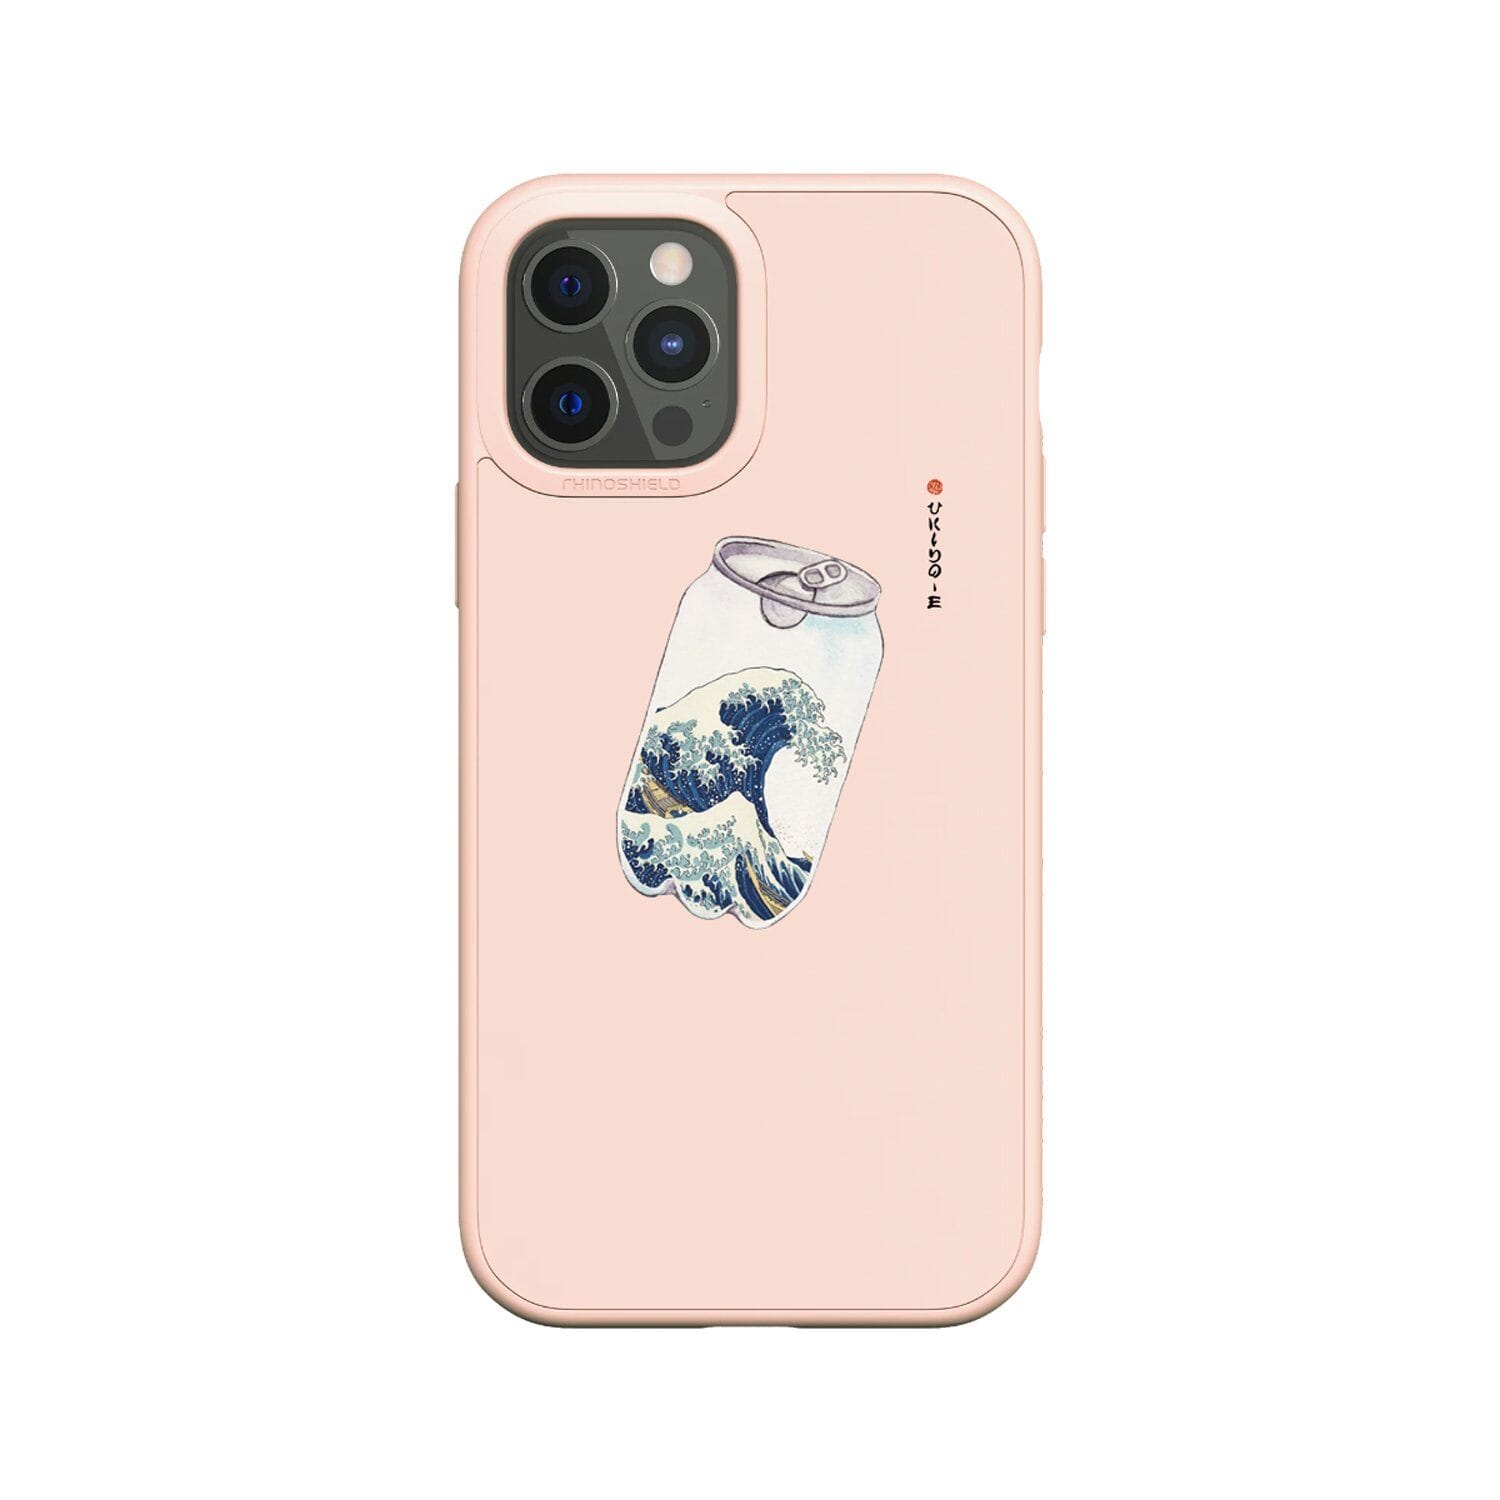 RhinoShield SolidSuit Design Case for iPhone 12 Series (2020) Default RhinoShield iPhone 12 Pro Max 6.7" Pink/Micro Tribe 